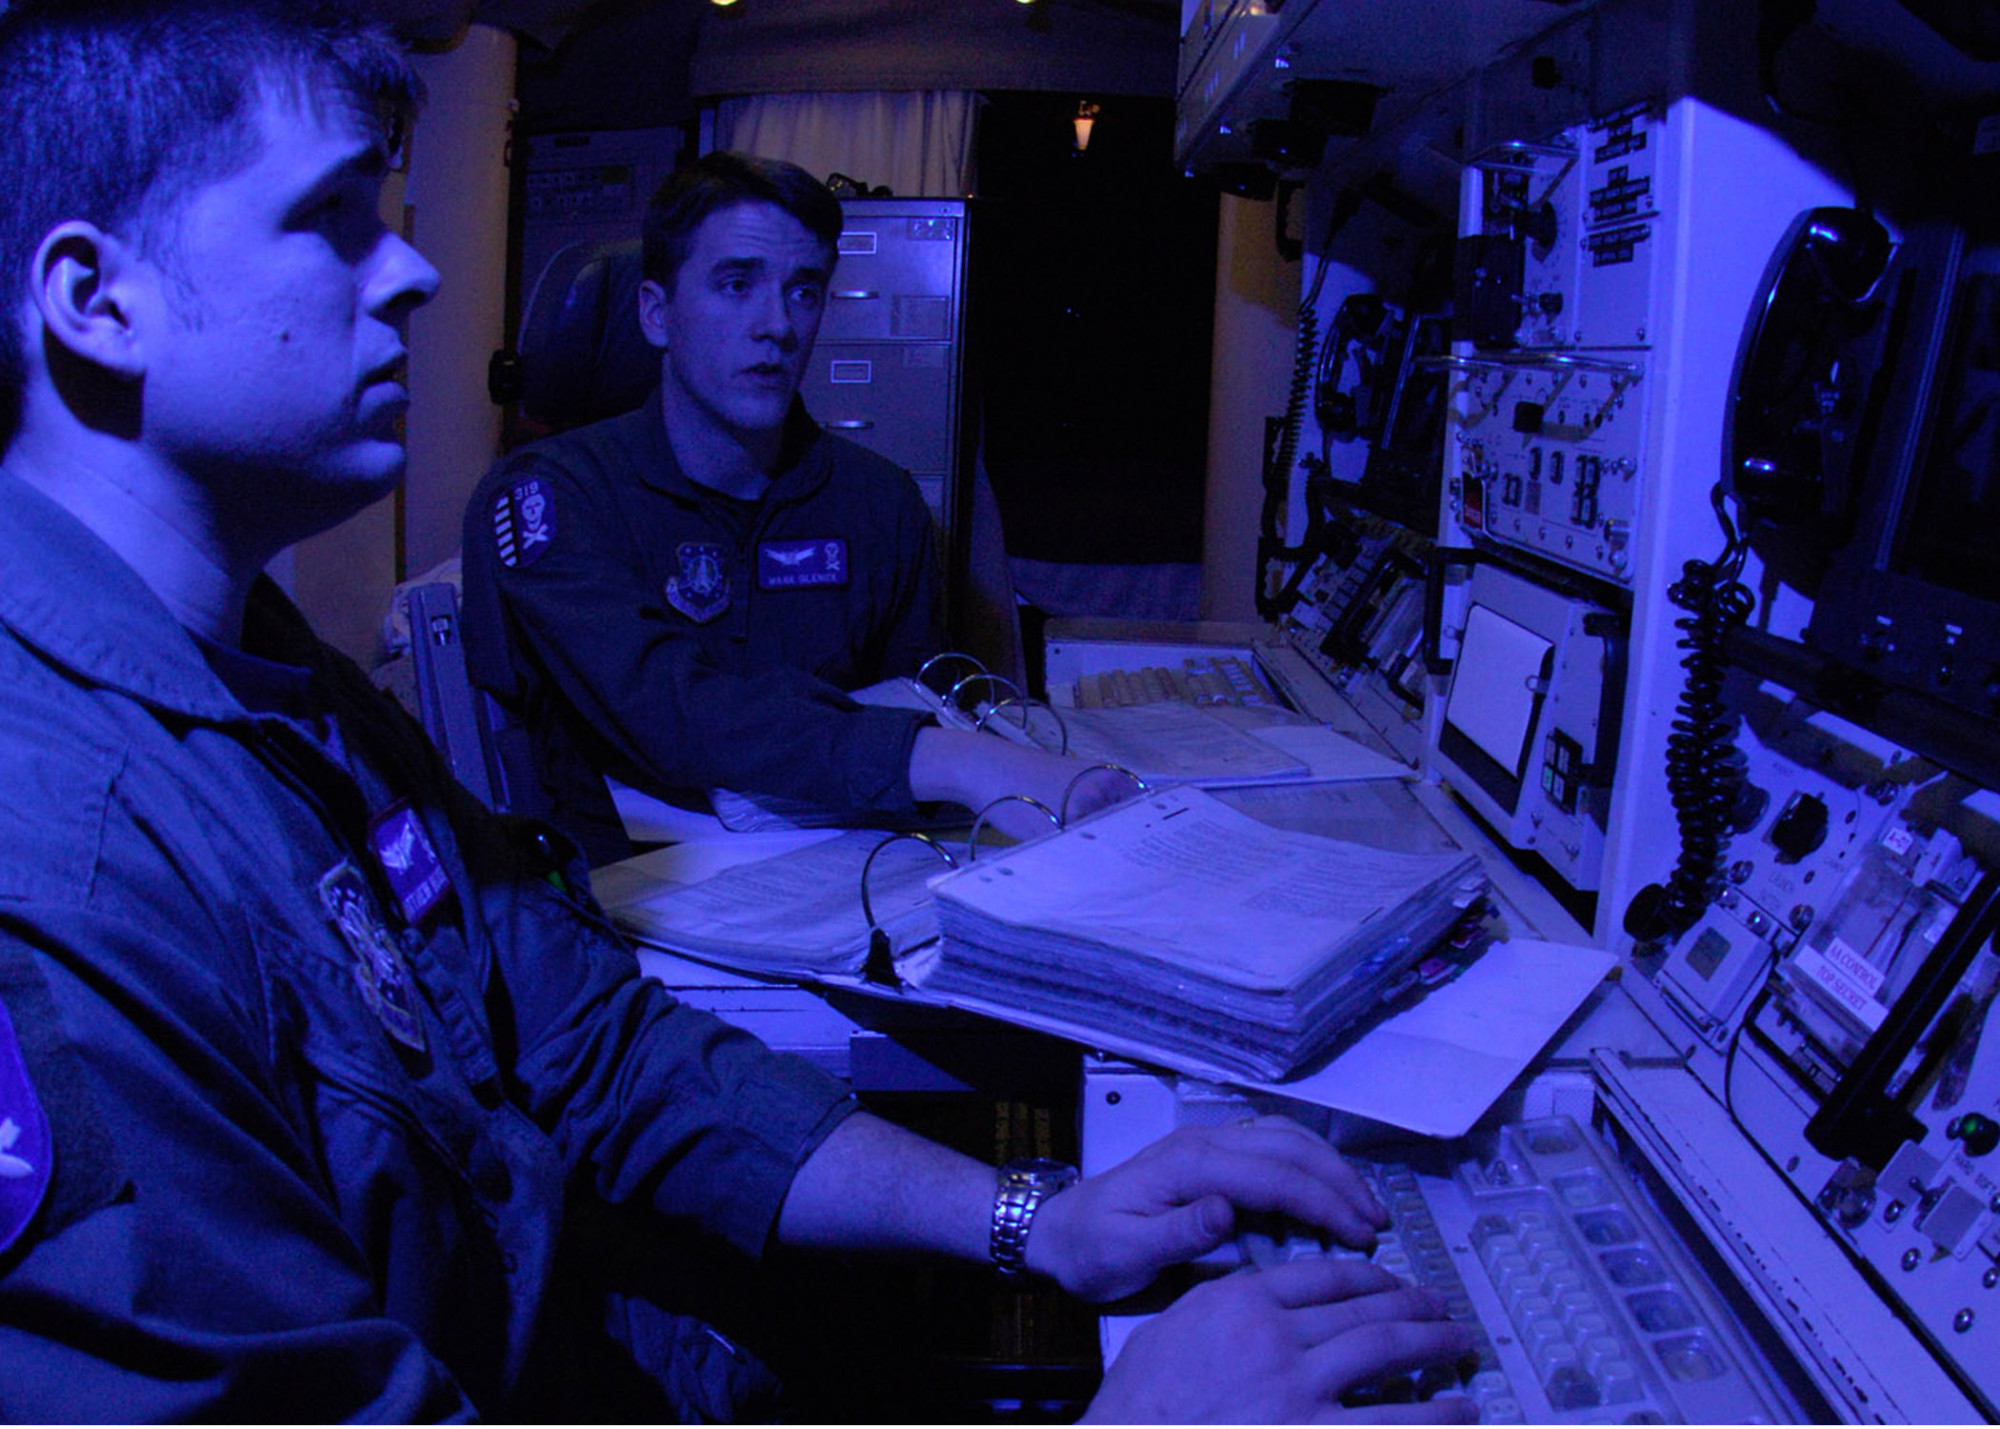 A pair of Air Force missile launch control officers, having passed their monthly proficiency tests, pull alert at a Minuteman III missile site. (SrA Javier Cruz Jr.—Air Force)